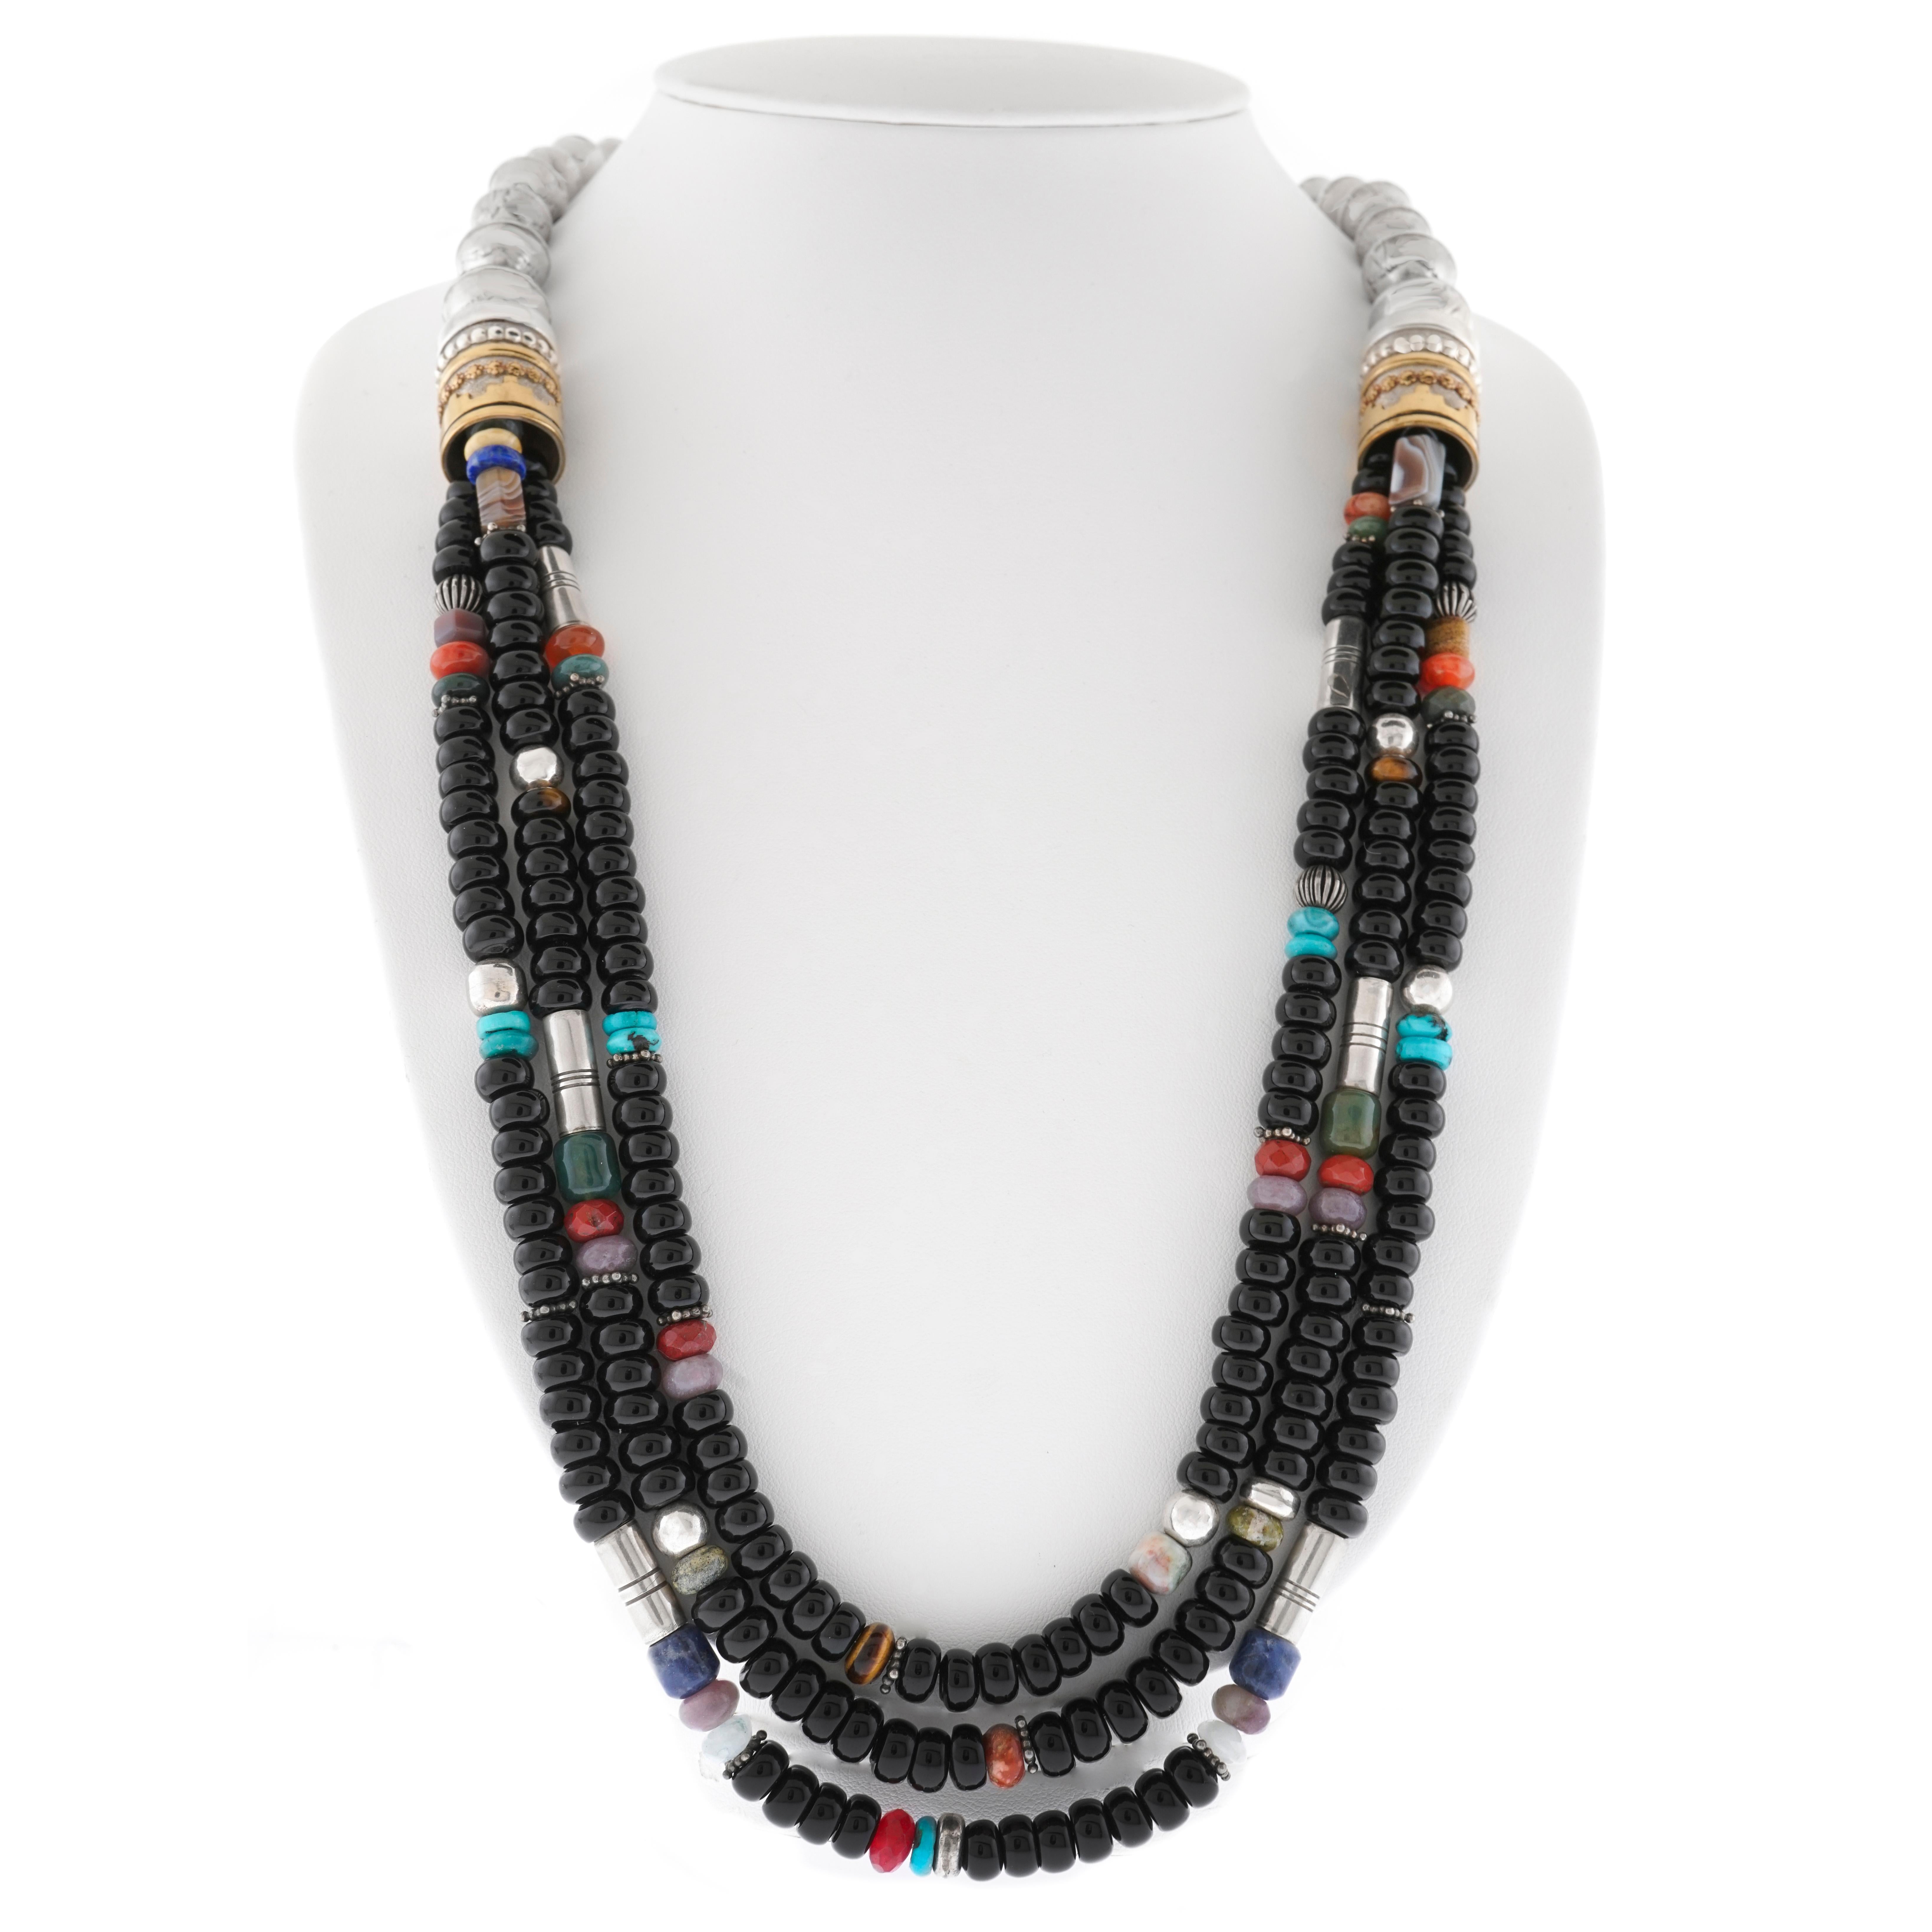 Women's or Men's Fabulous Navajo Multi-Strand Necklace by Tommy Singer